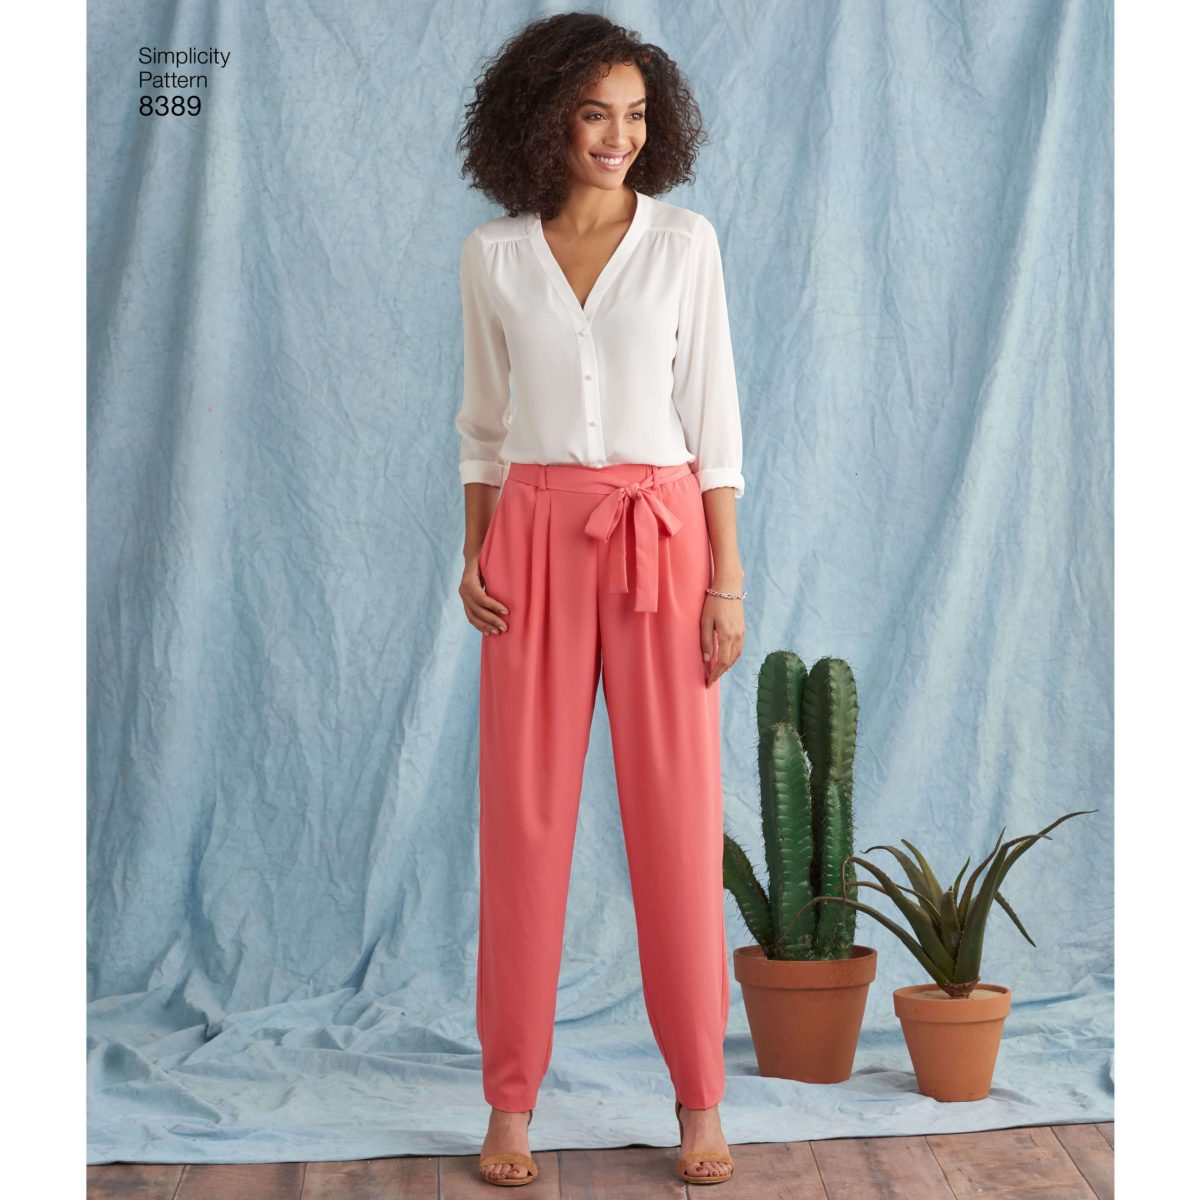 Simplicity Pattern 8389 Misses' Trousers with Length and Width Variations and Tie Belt